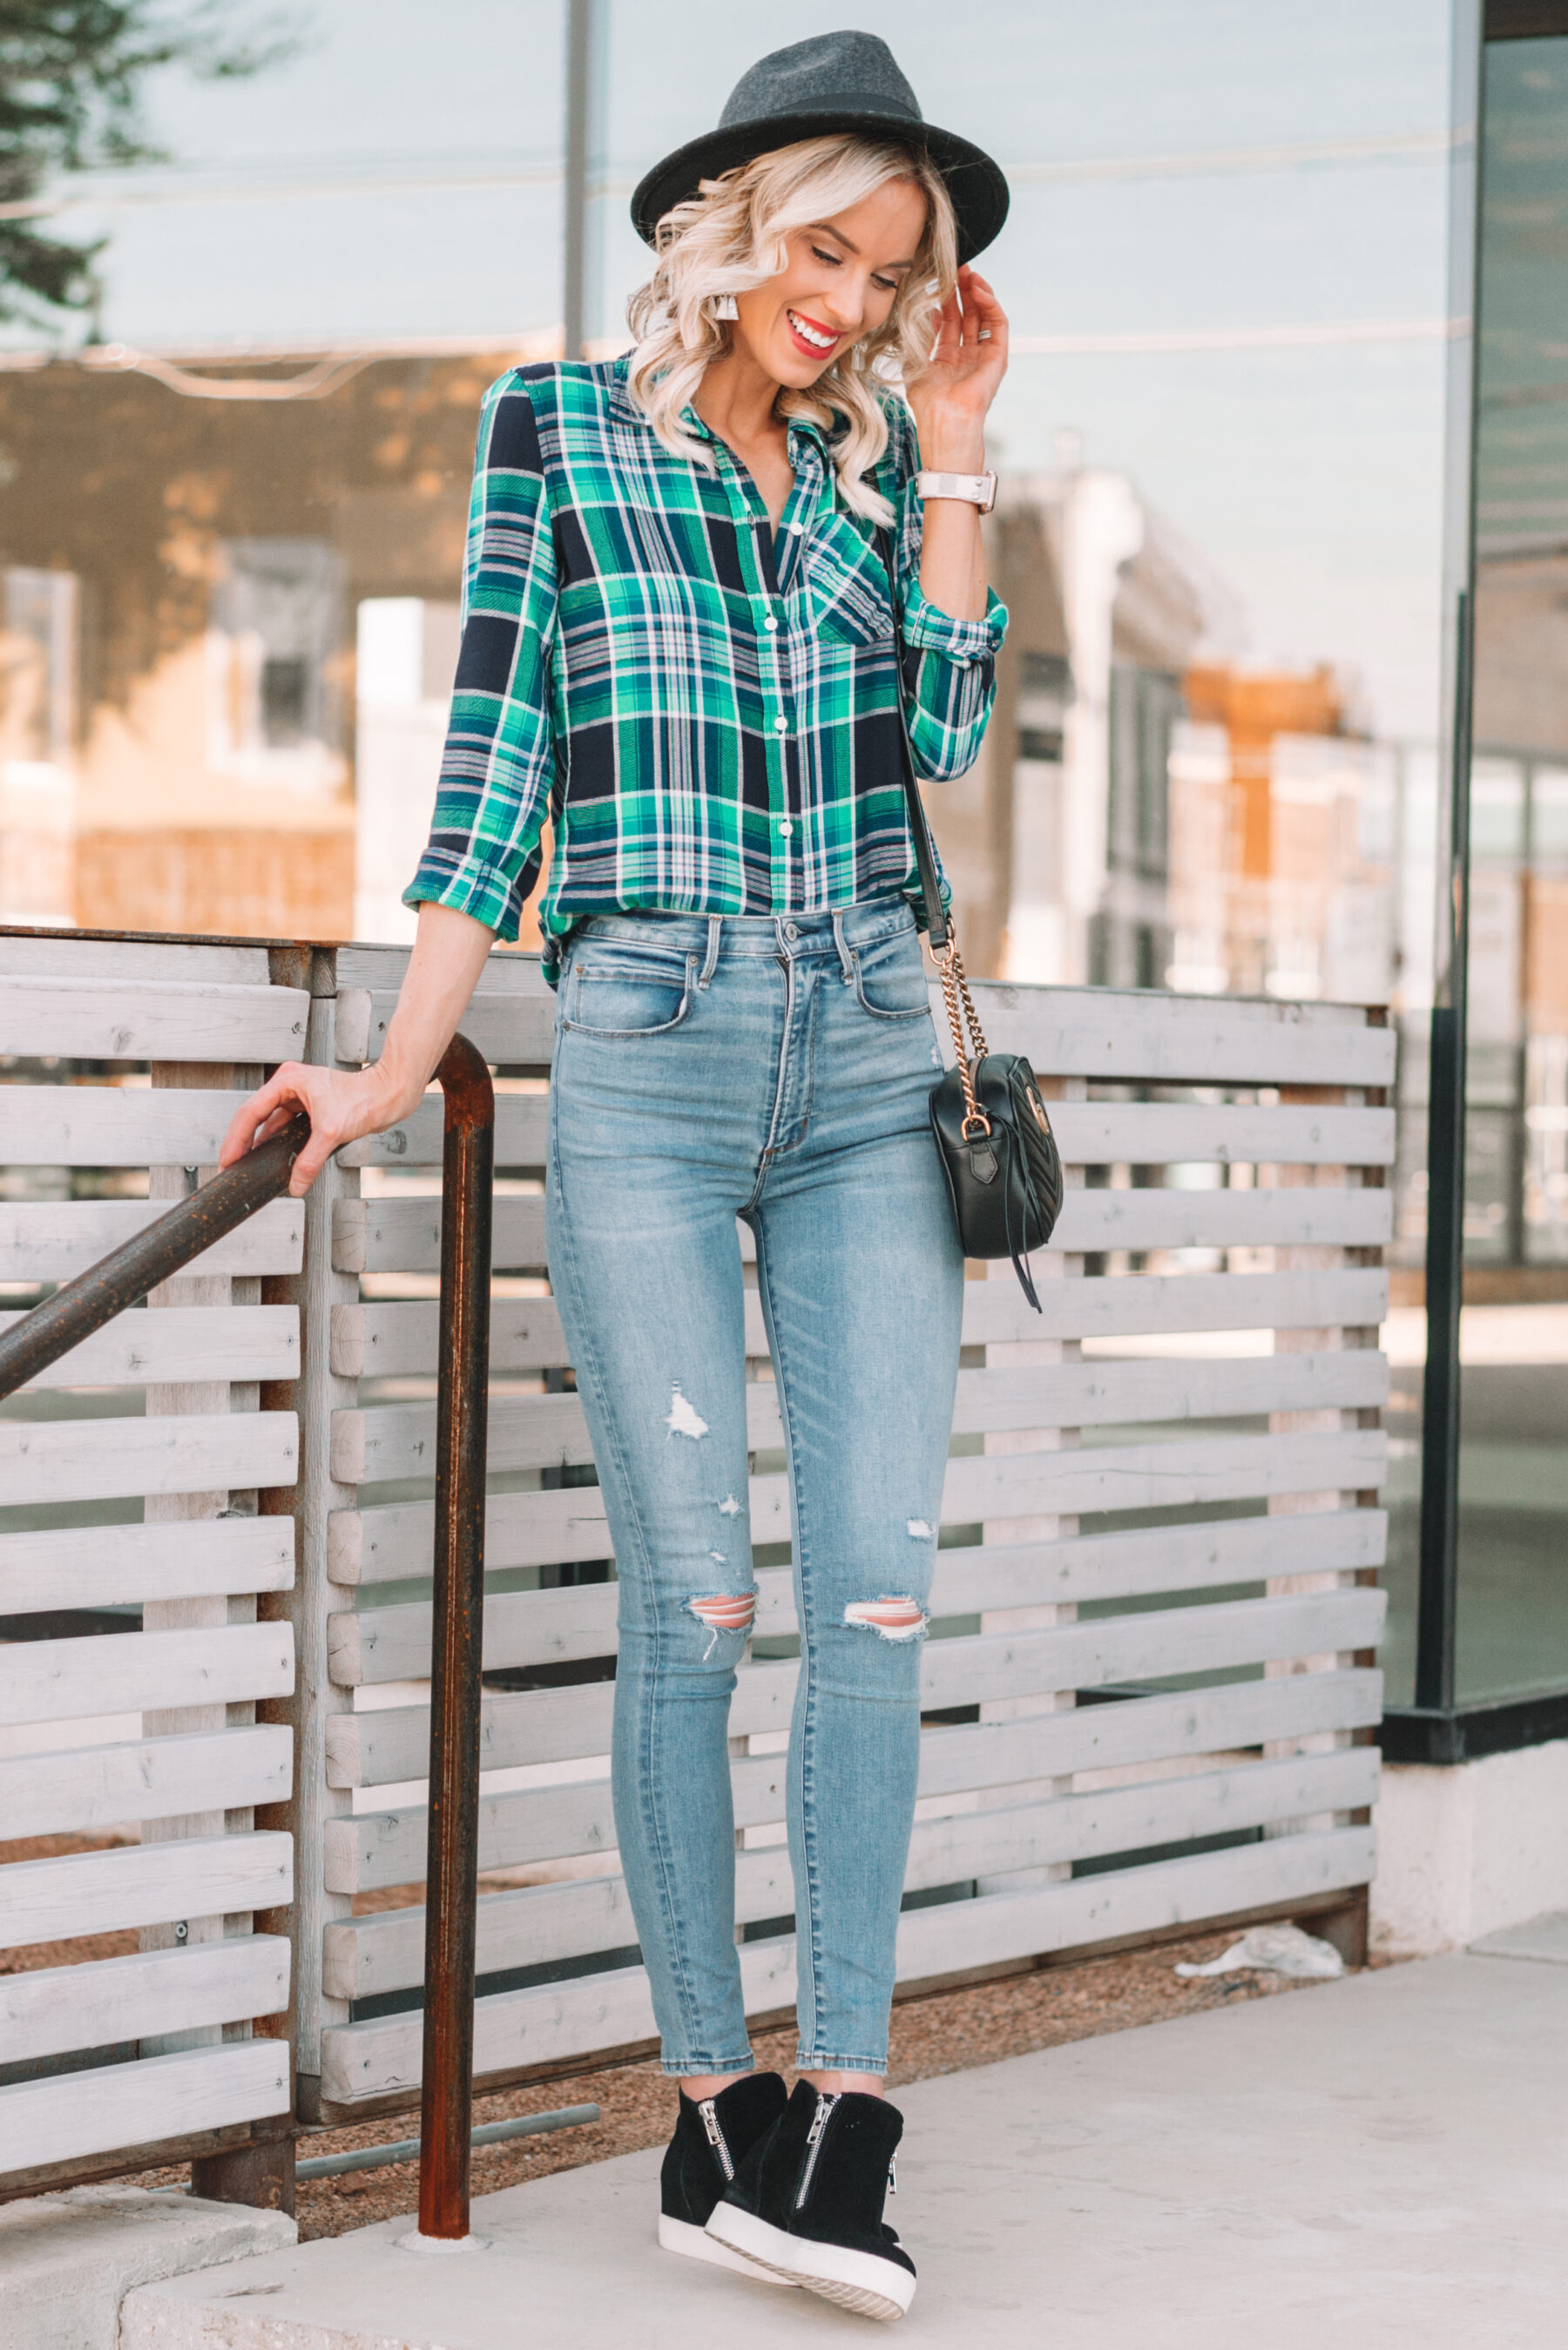 How to Wear a Flannel Shirt for Fall - The Aesthetic Edge